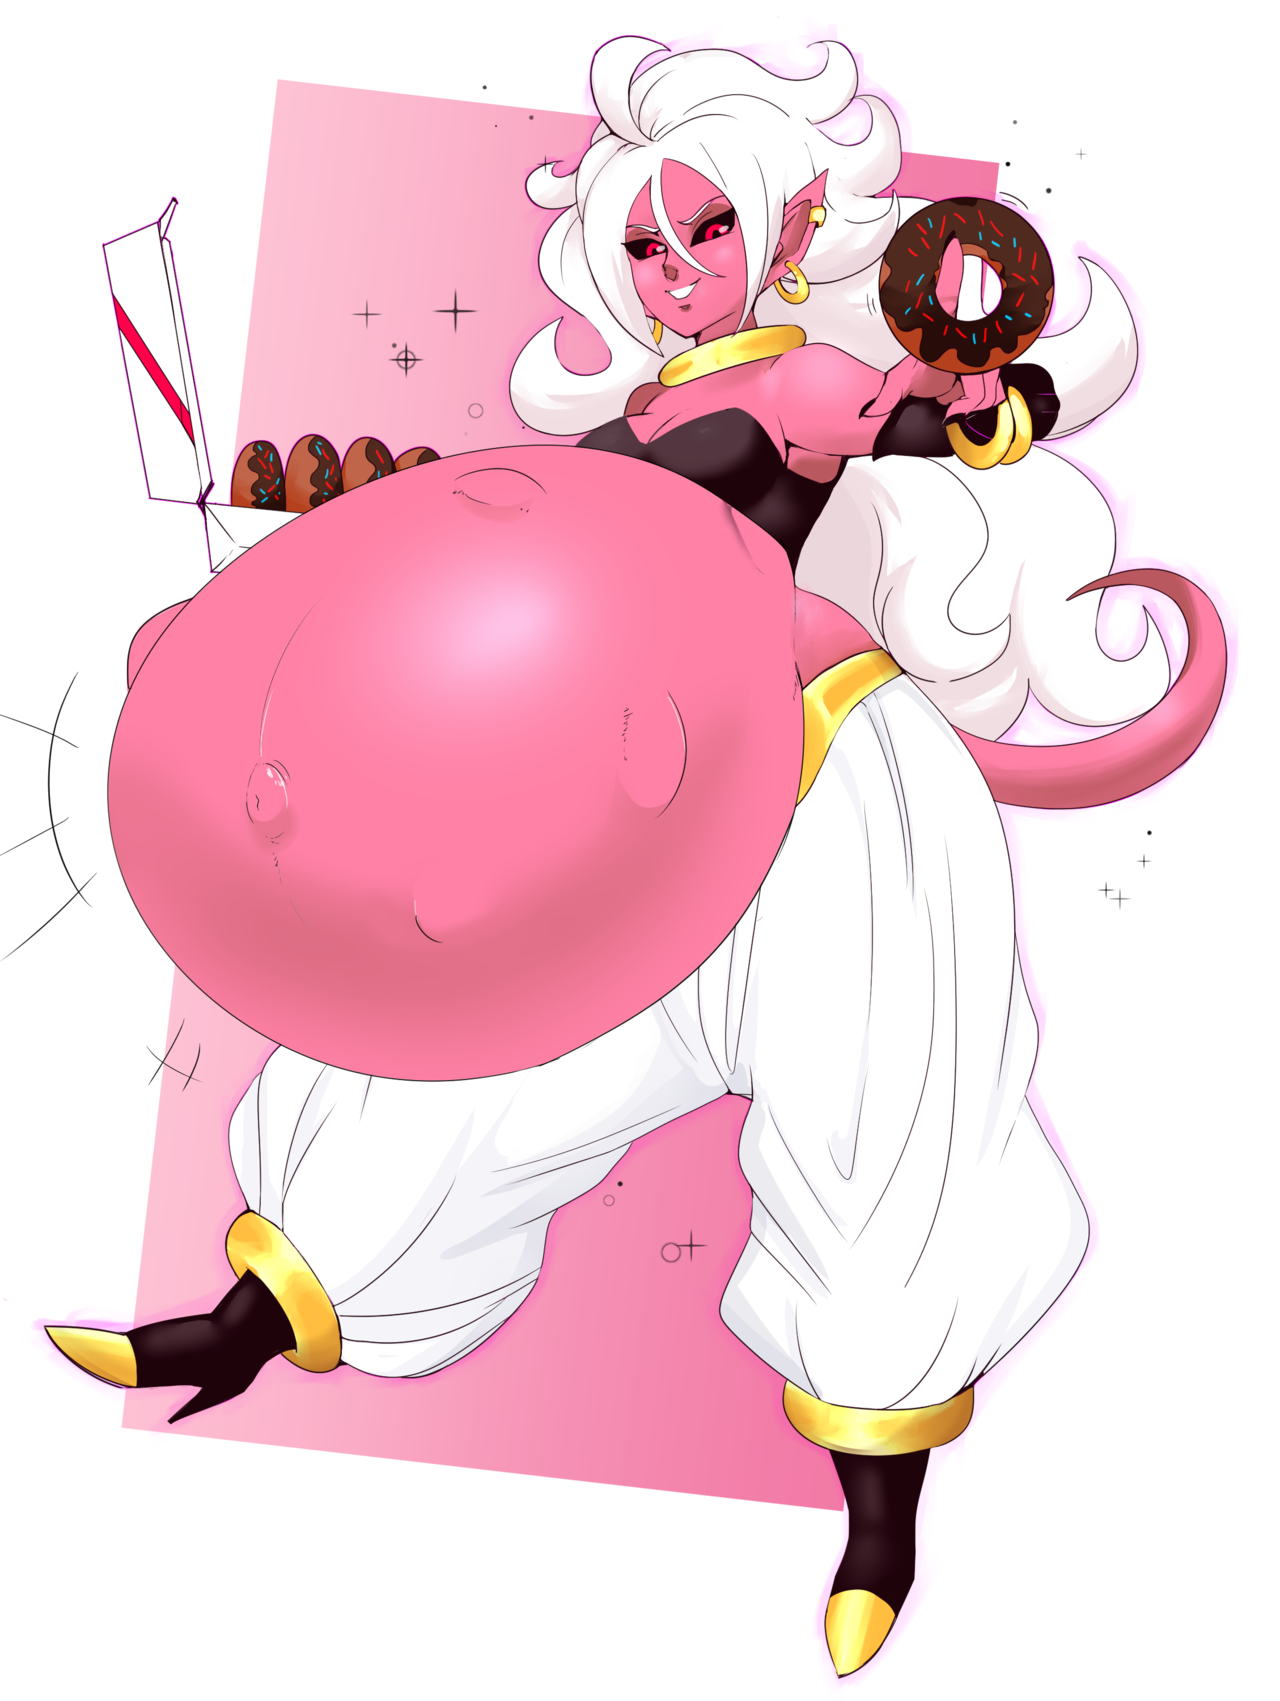 Android 21 pregnant